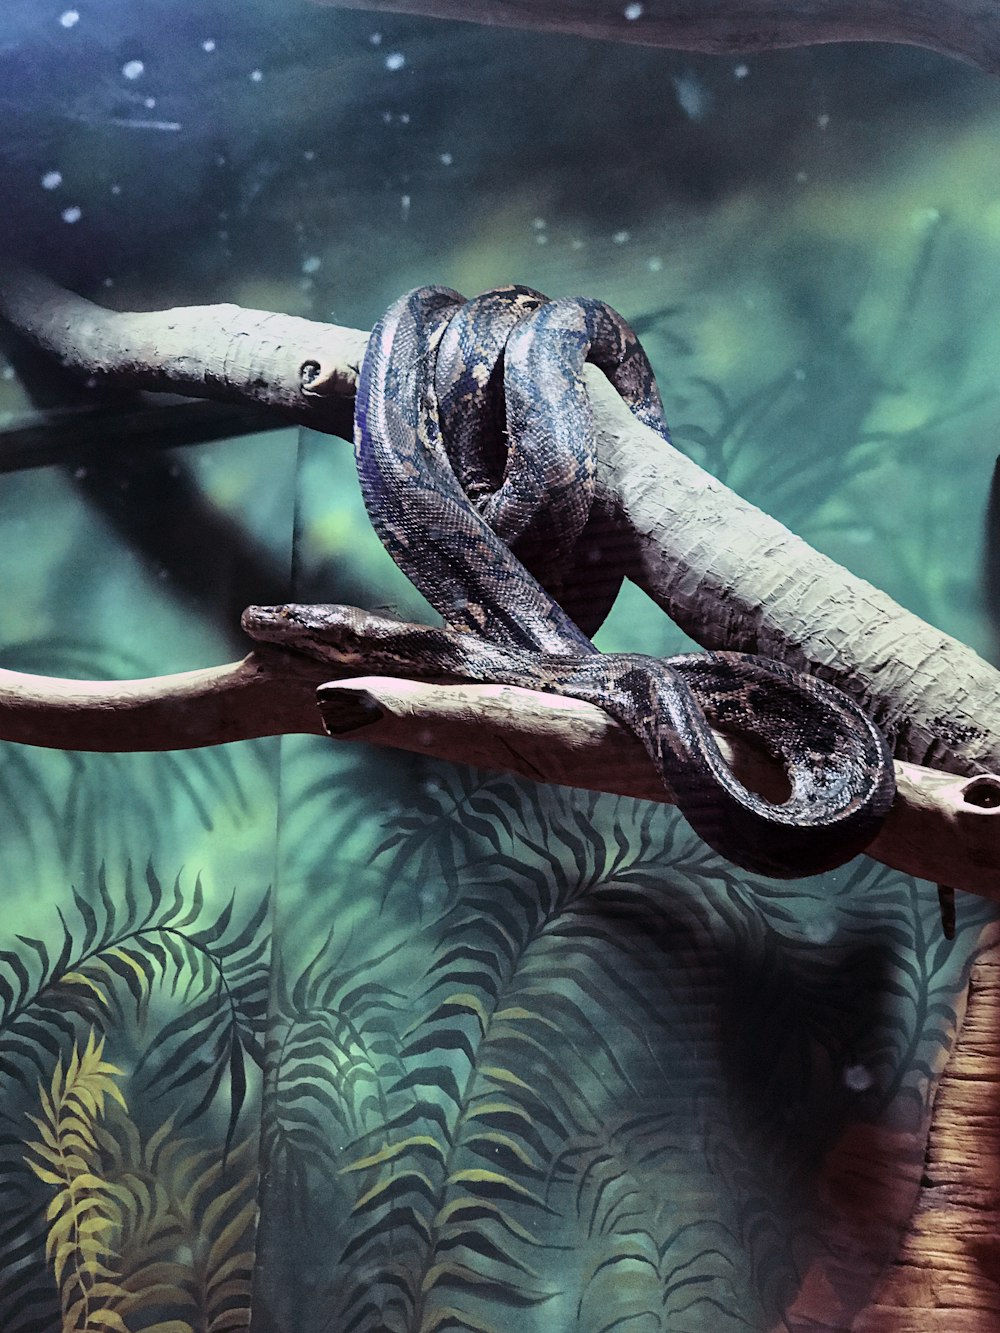 brown and black snake on tree branch